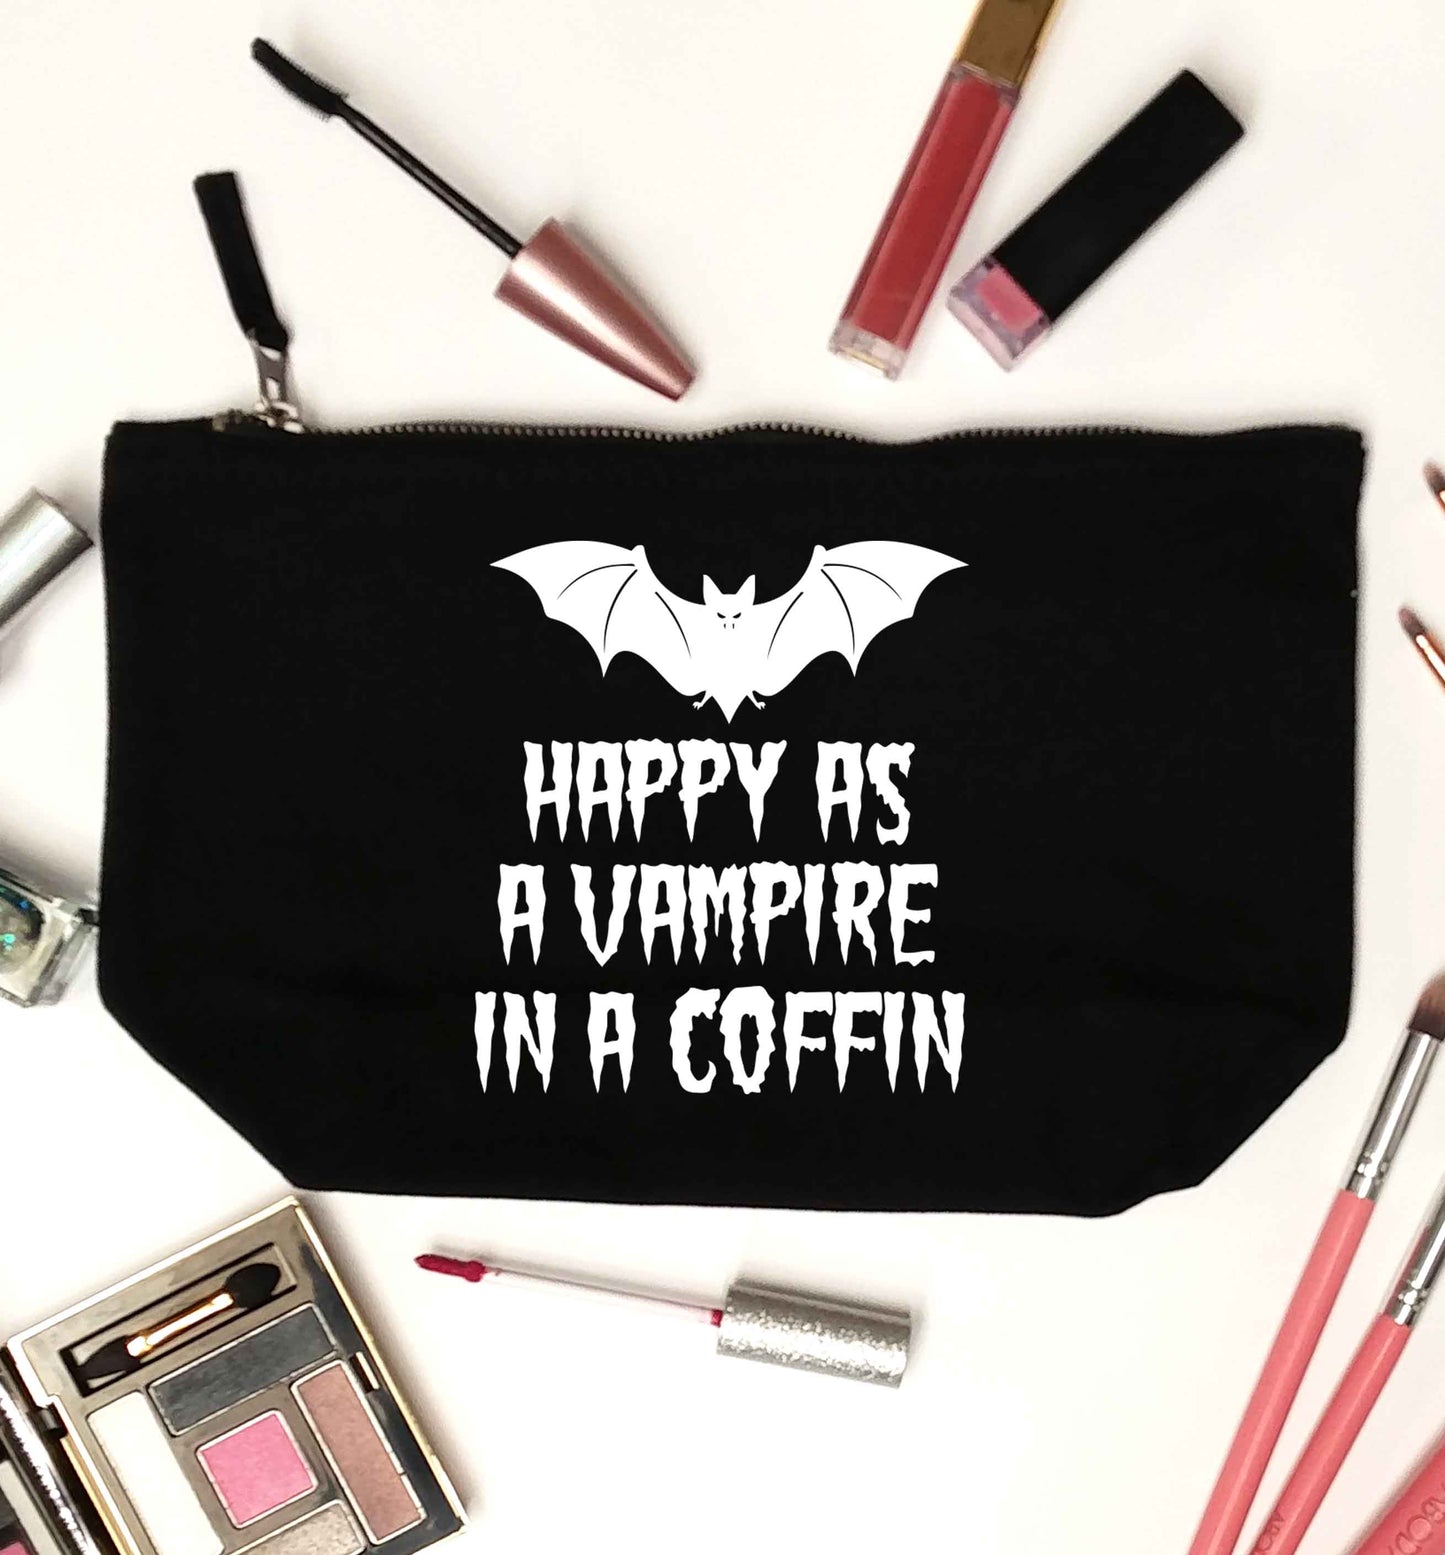 Happy as a vampire in a coffin black makeup bag